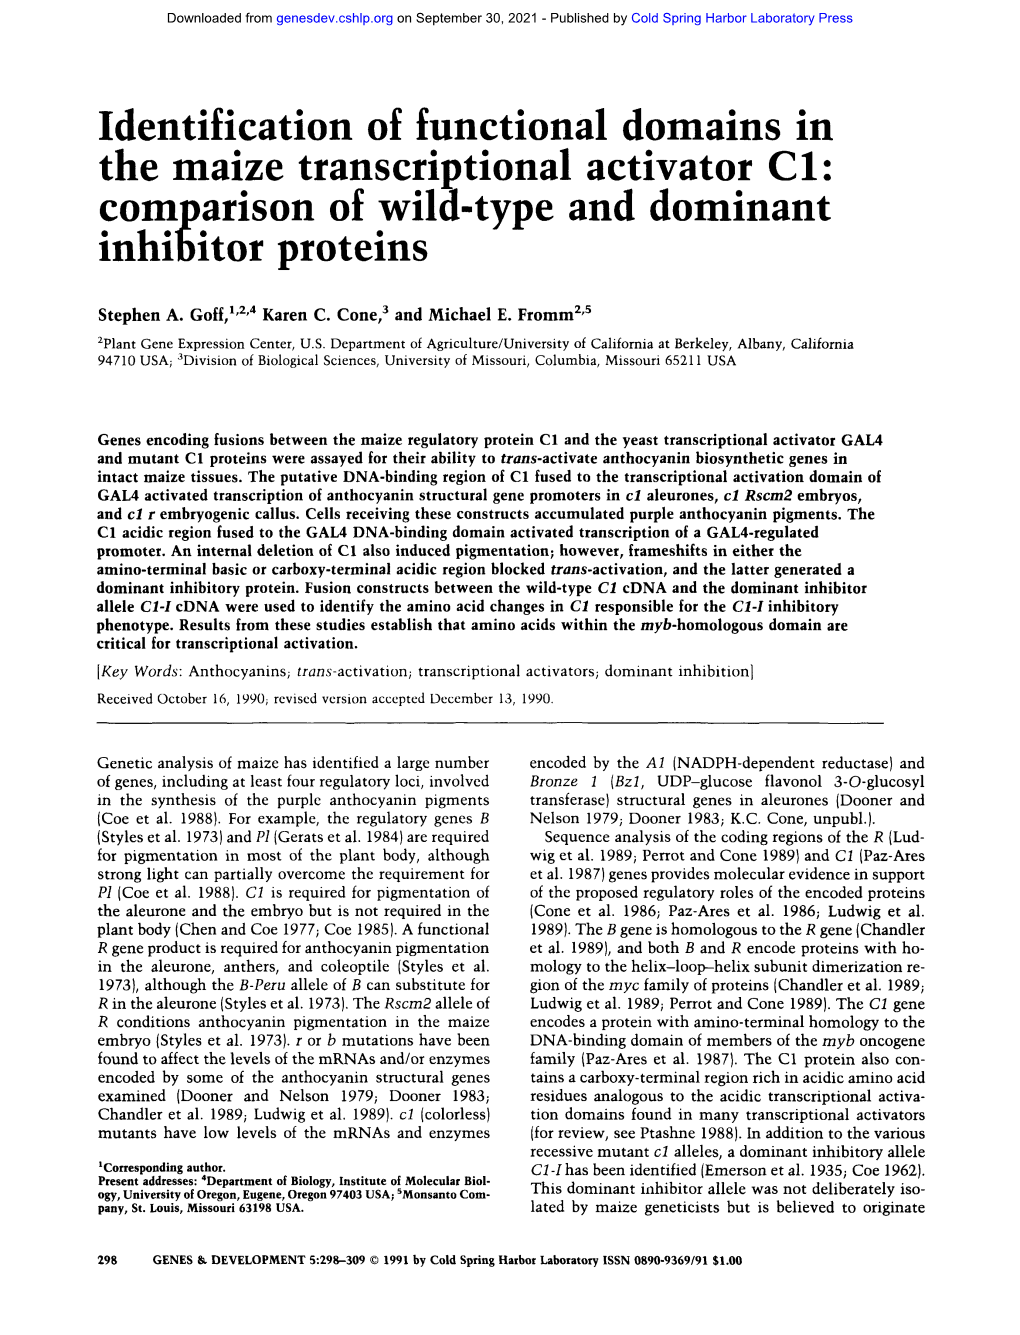 Identification of Functional Domains in the Maize Transcriptional Activator CI: Comparison of Wild-Type and Dominant Inhibitor Proteins